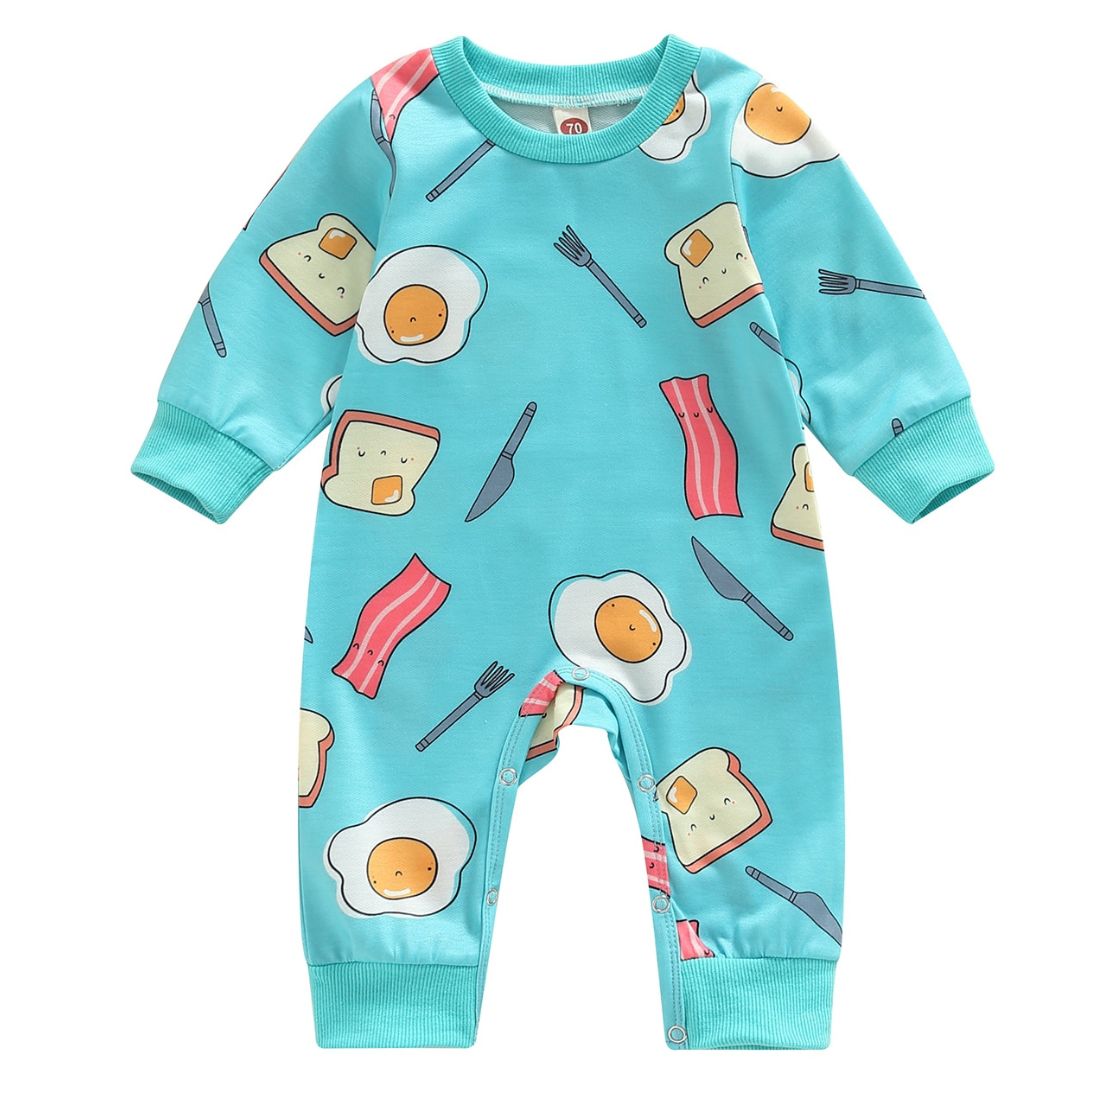 Unisex Long Sleeve Brekkie Time Romper - My Trendy Youngsters - Buy Trendy and Afforable Baby Bodysuits @ My Trendy Youngsters - Dress your Mini in Style @ My Trendy Youngsters